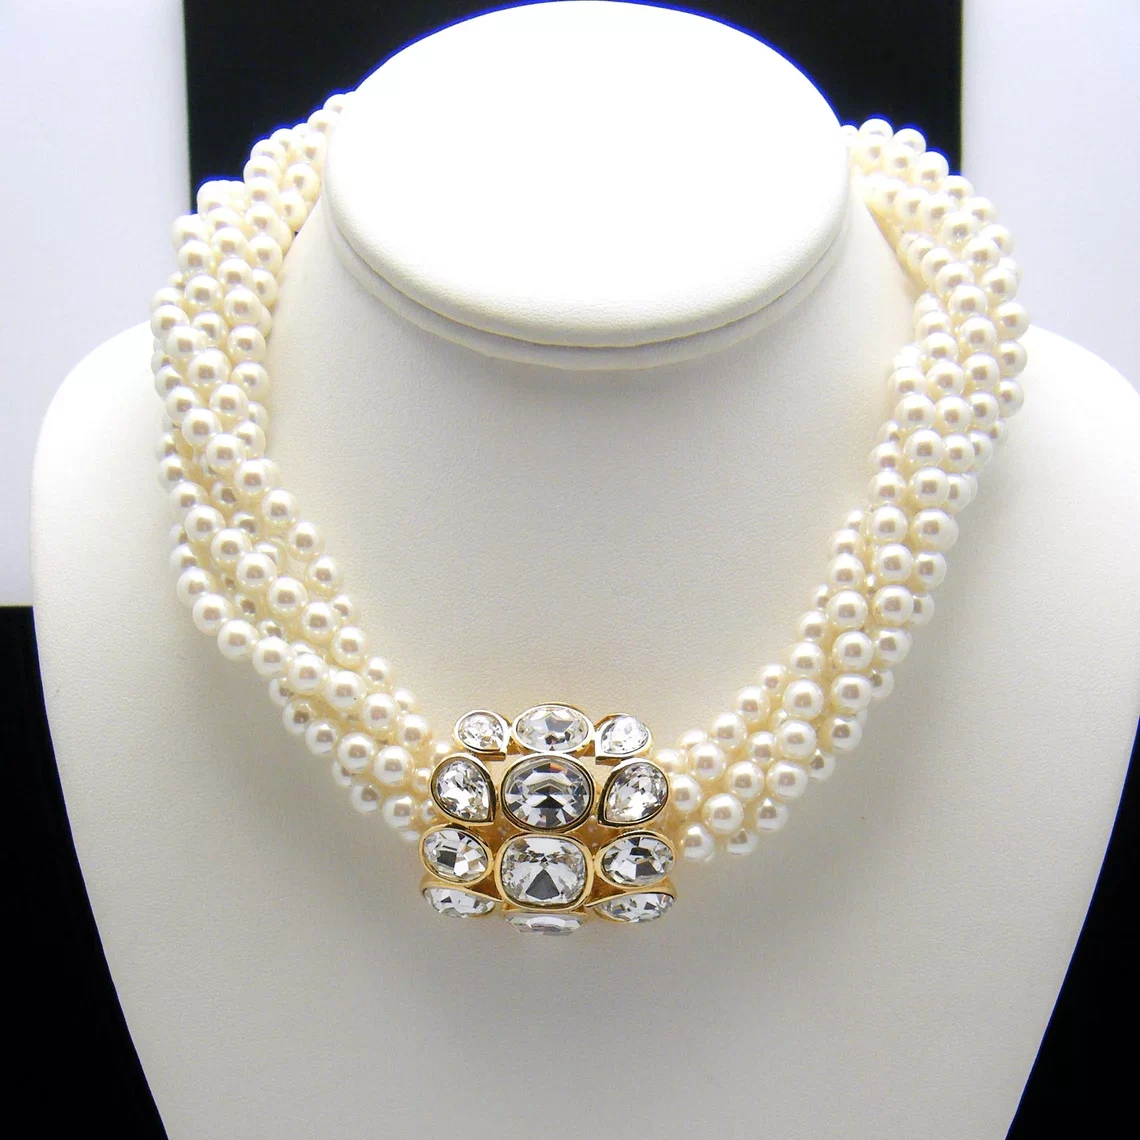 pearl and rhinestone torsade necklace on the bust mannequin